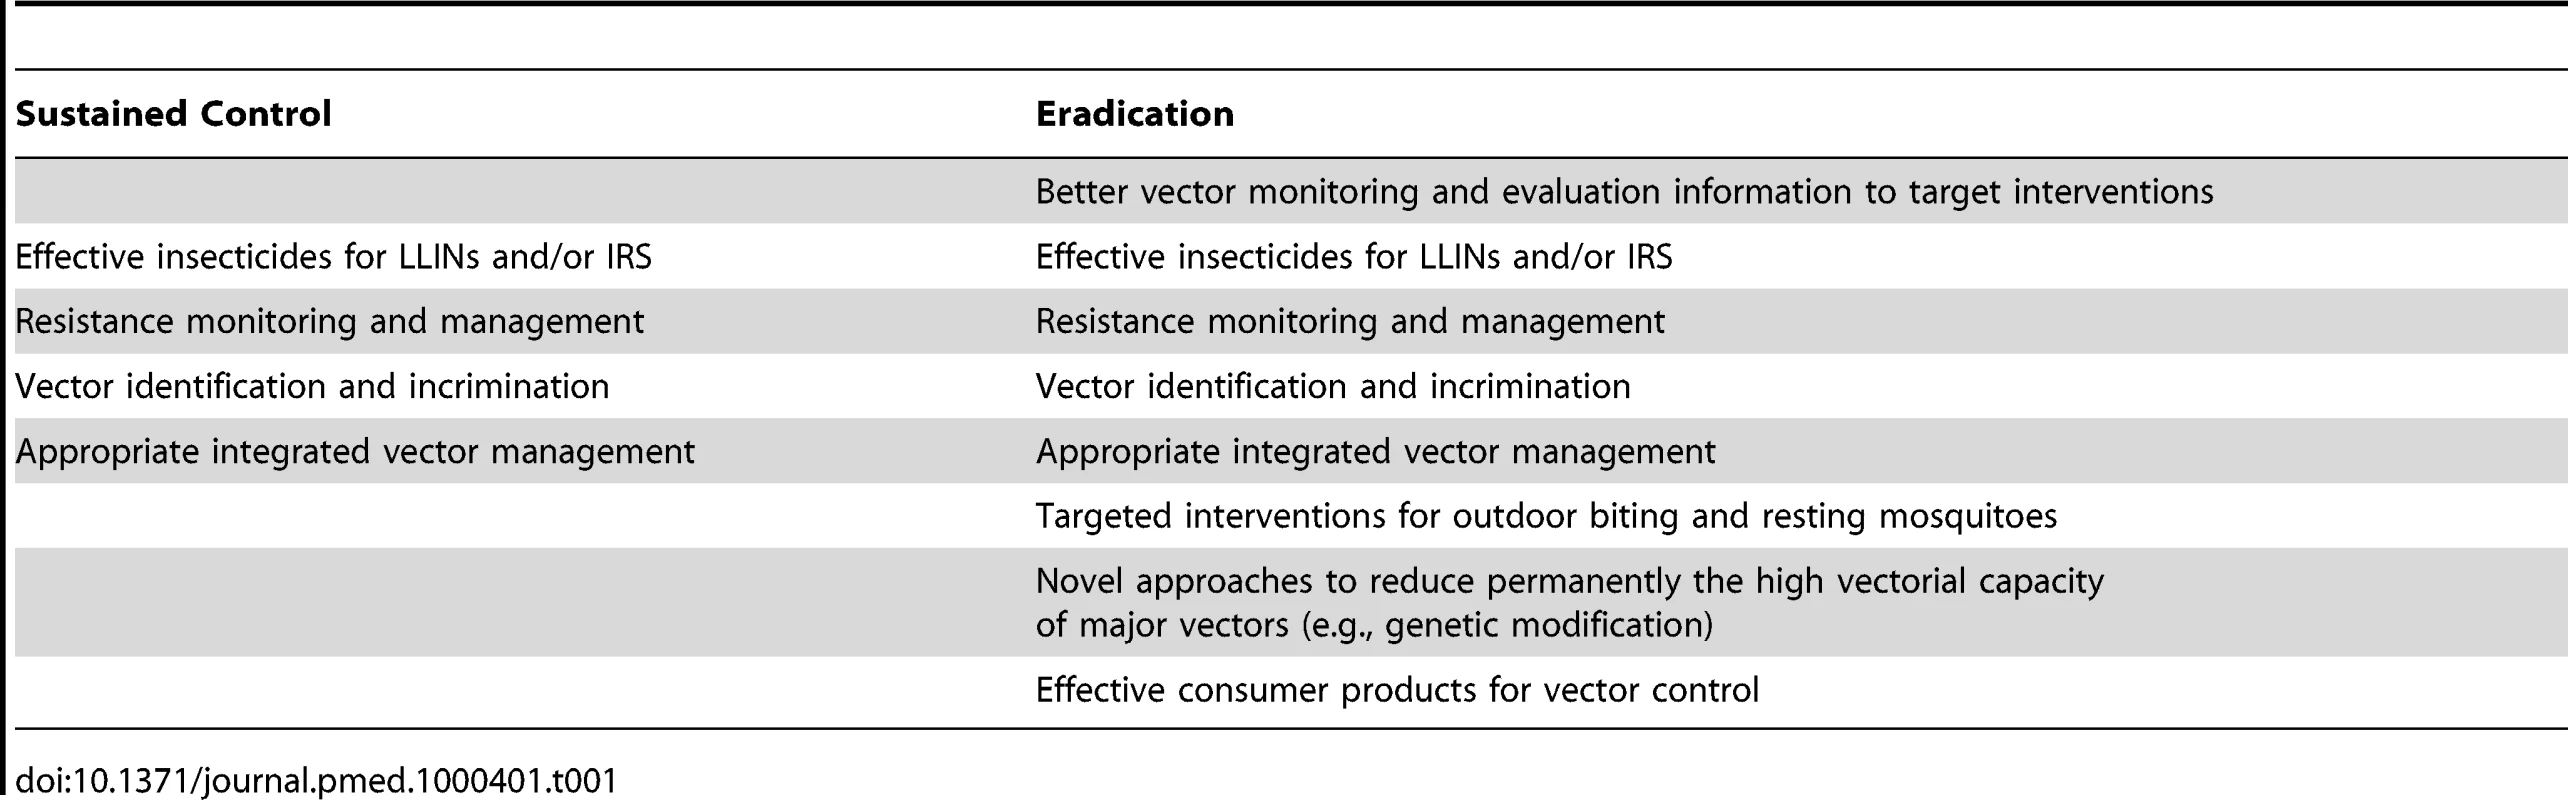 Vector control interventions required for sustained control and for eradication.